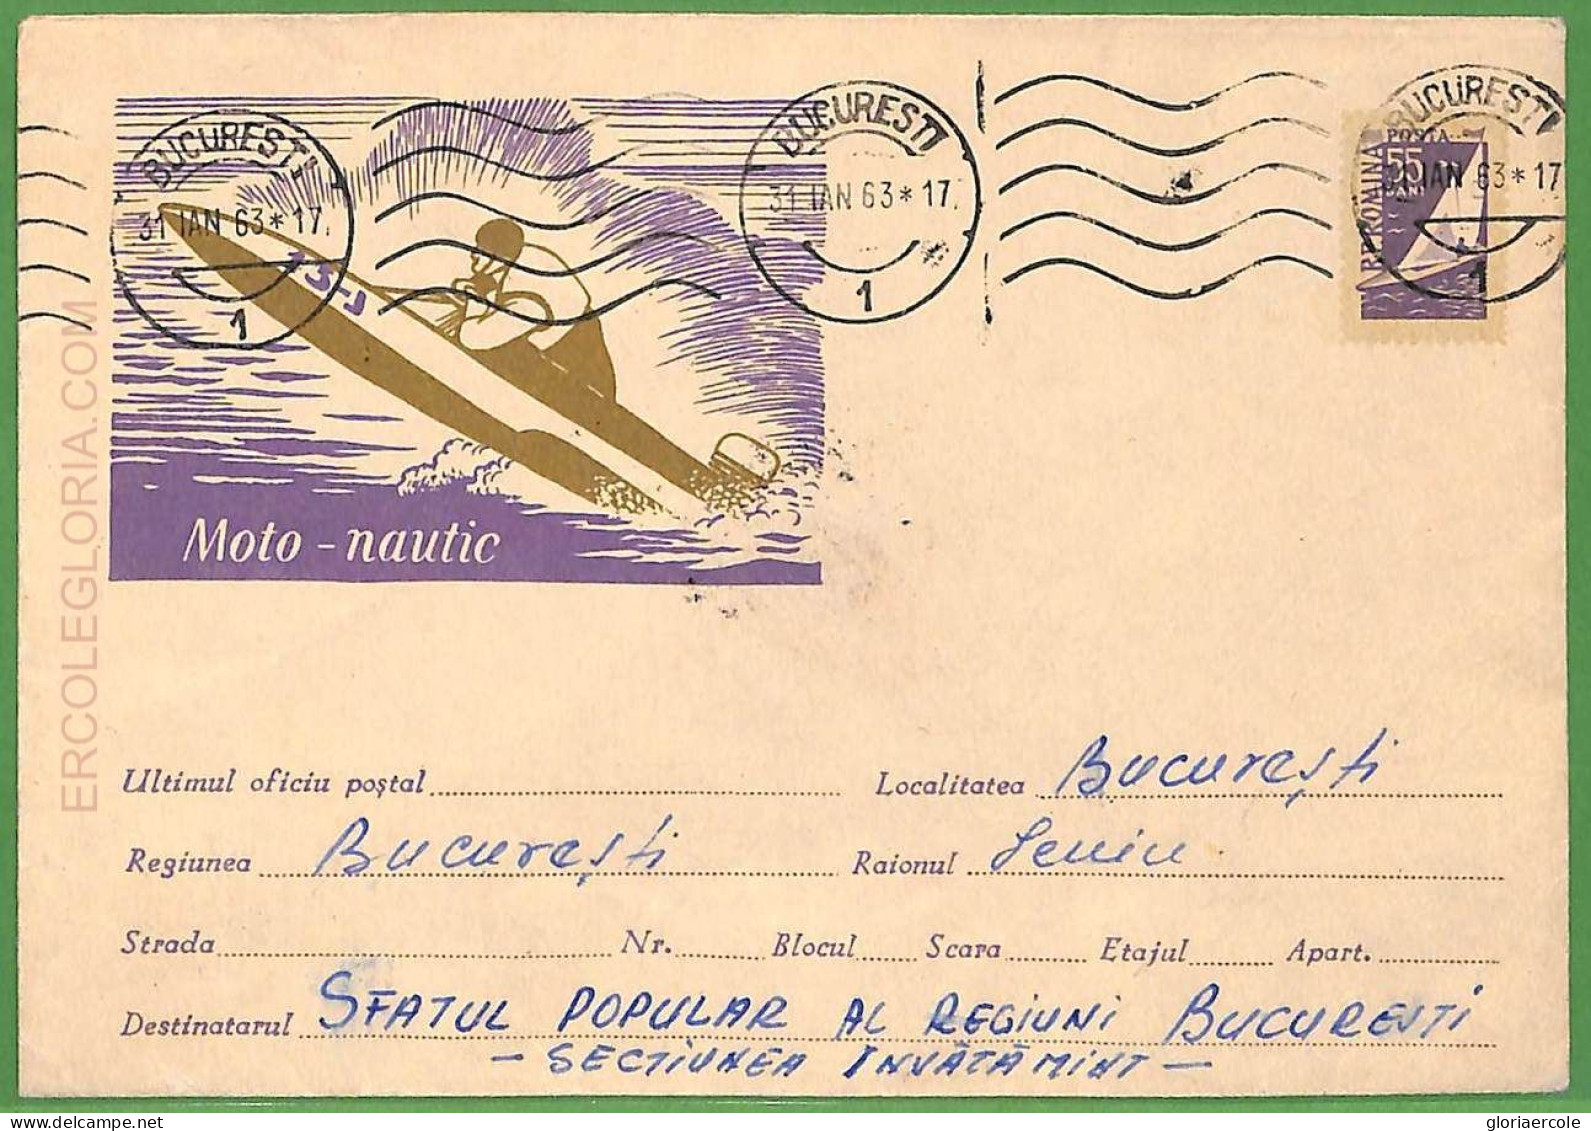 Af3773  - ROMANIA - POSTAL HISTORY - Postal Stationery Cover- ROWING Canoes-1963 - Canoa